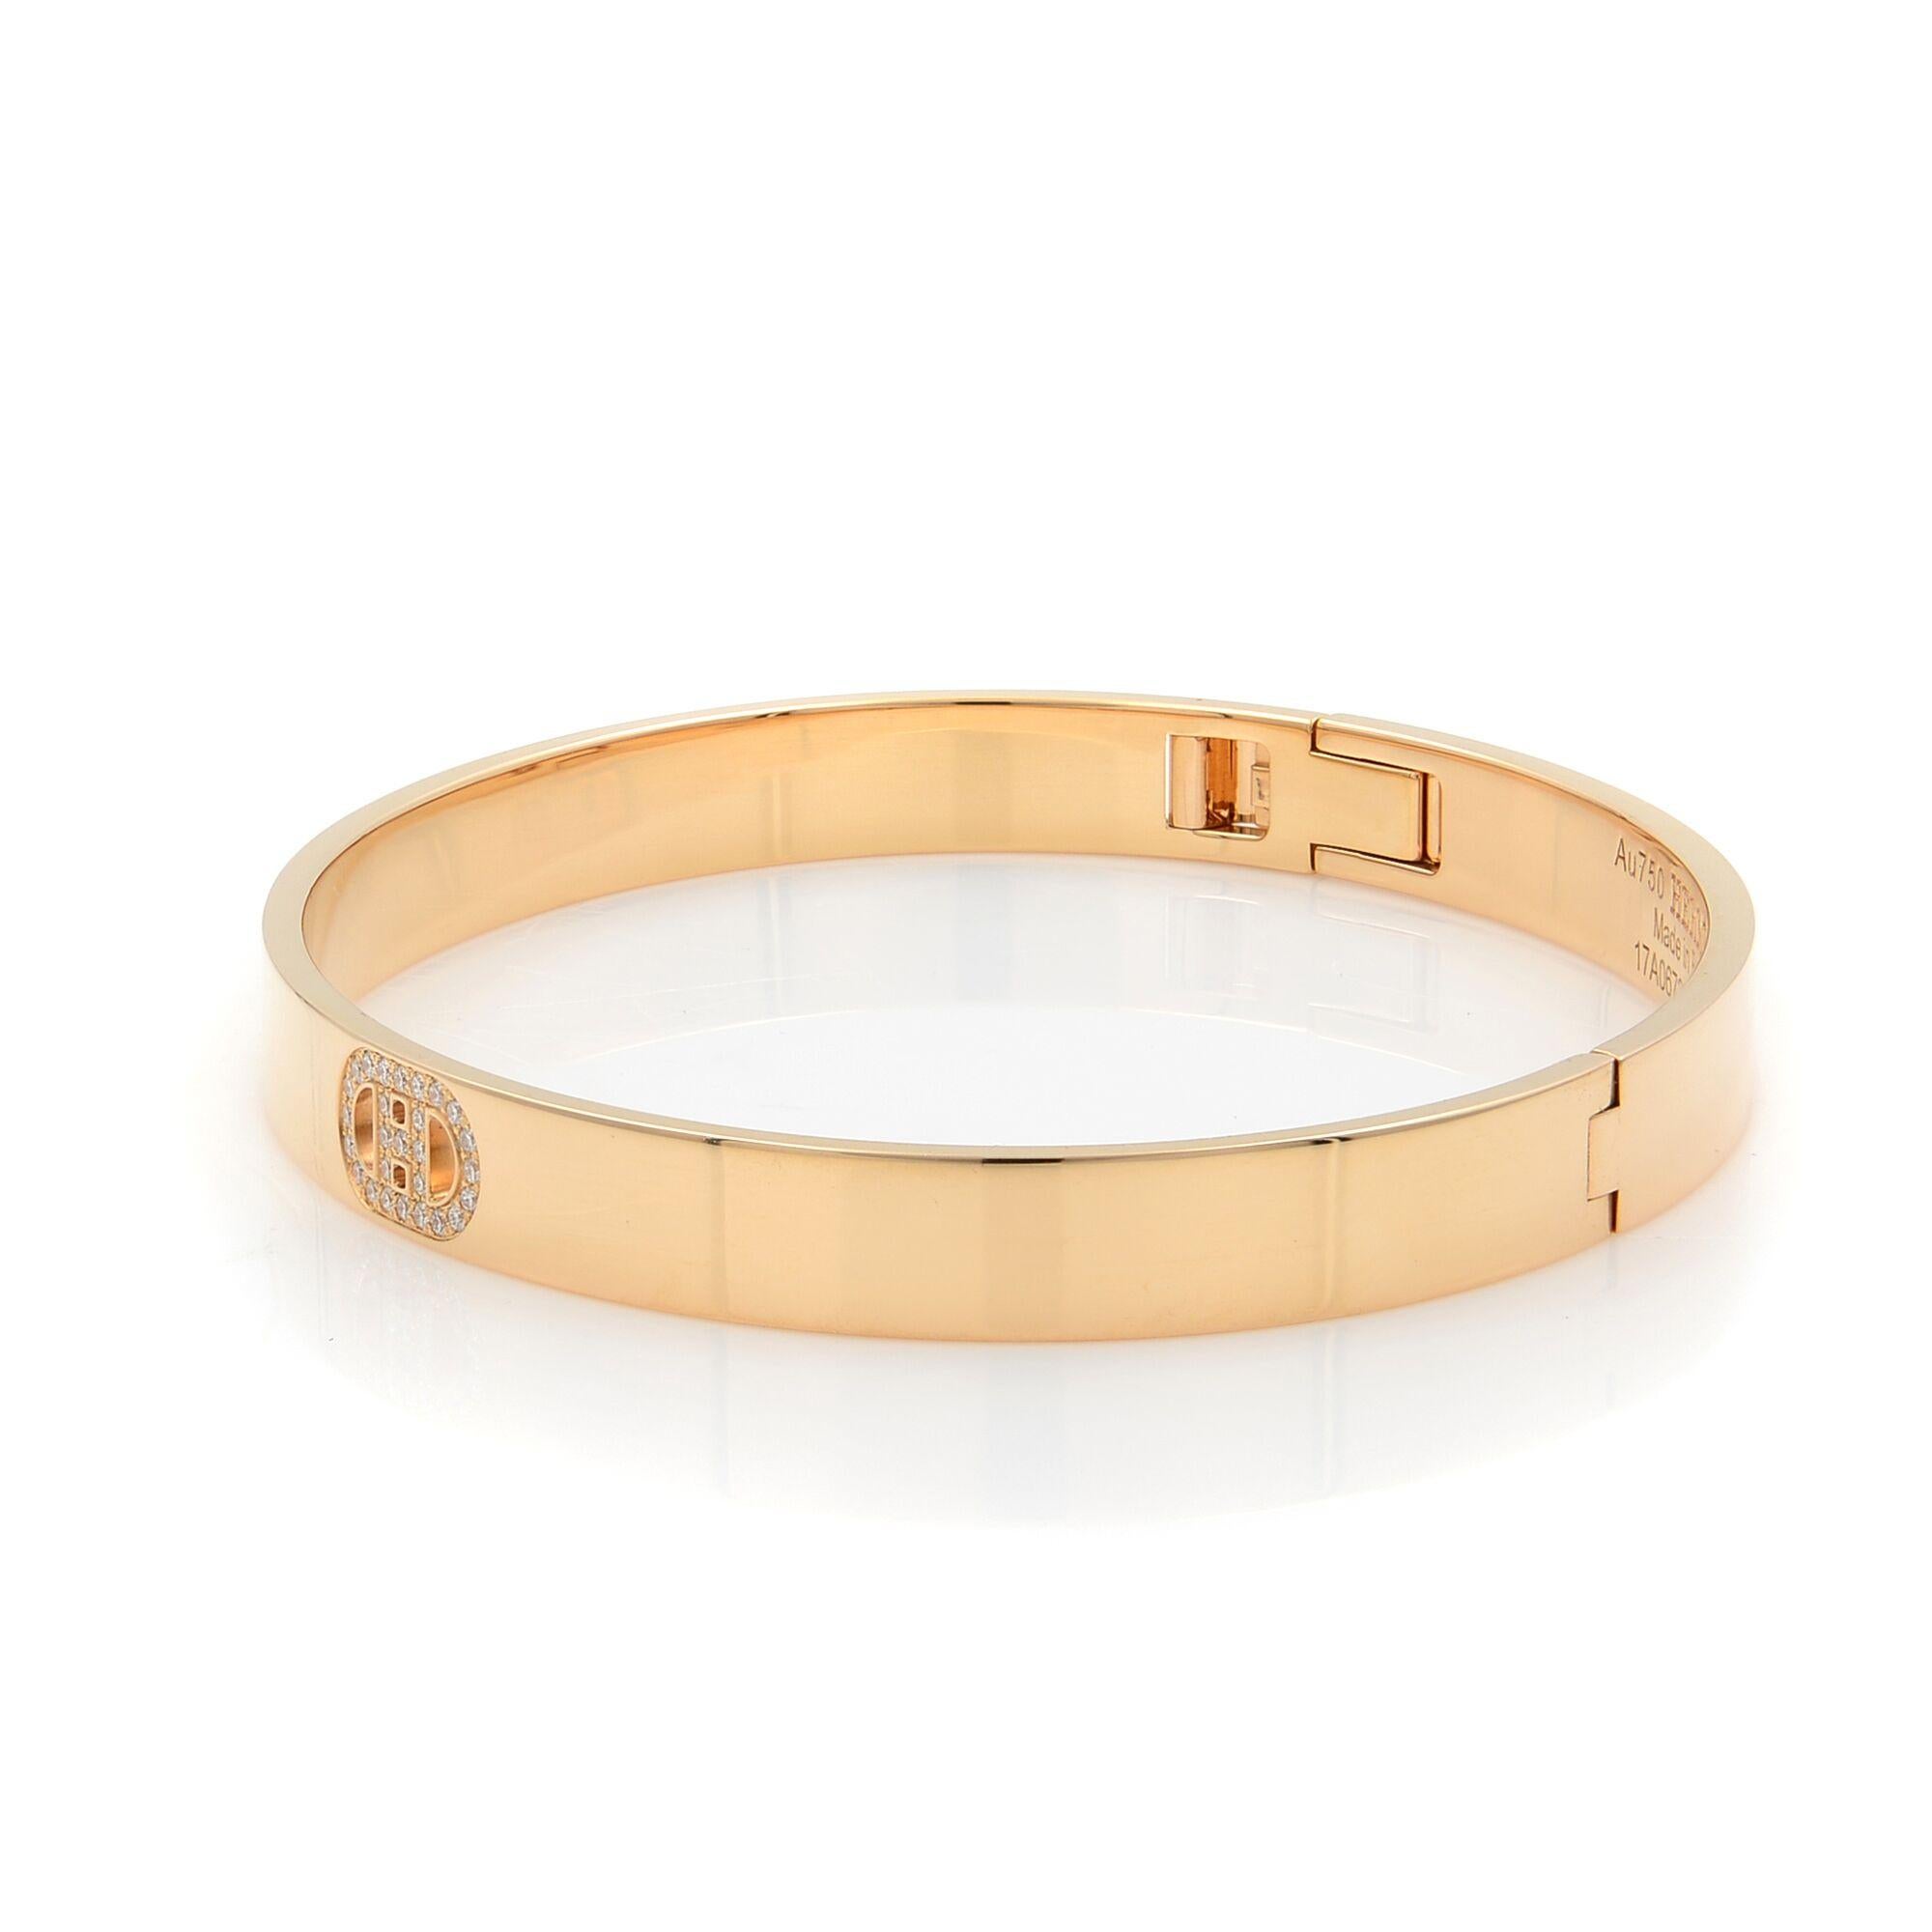 This is an authentic Hermes 18K Rose Gold Diamond H D'Ancre Small Bracelet SH. This lovely bracelet is crafted of 18 karat rose gold and features a Hermes H oval logo set with pave diamonds. There is a latch for ease of opening. This is a marvelous